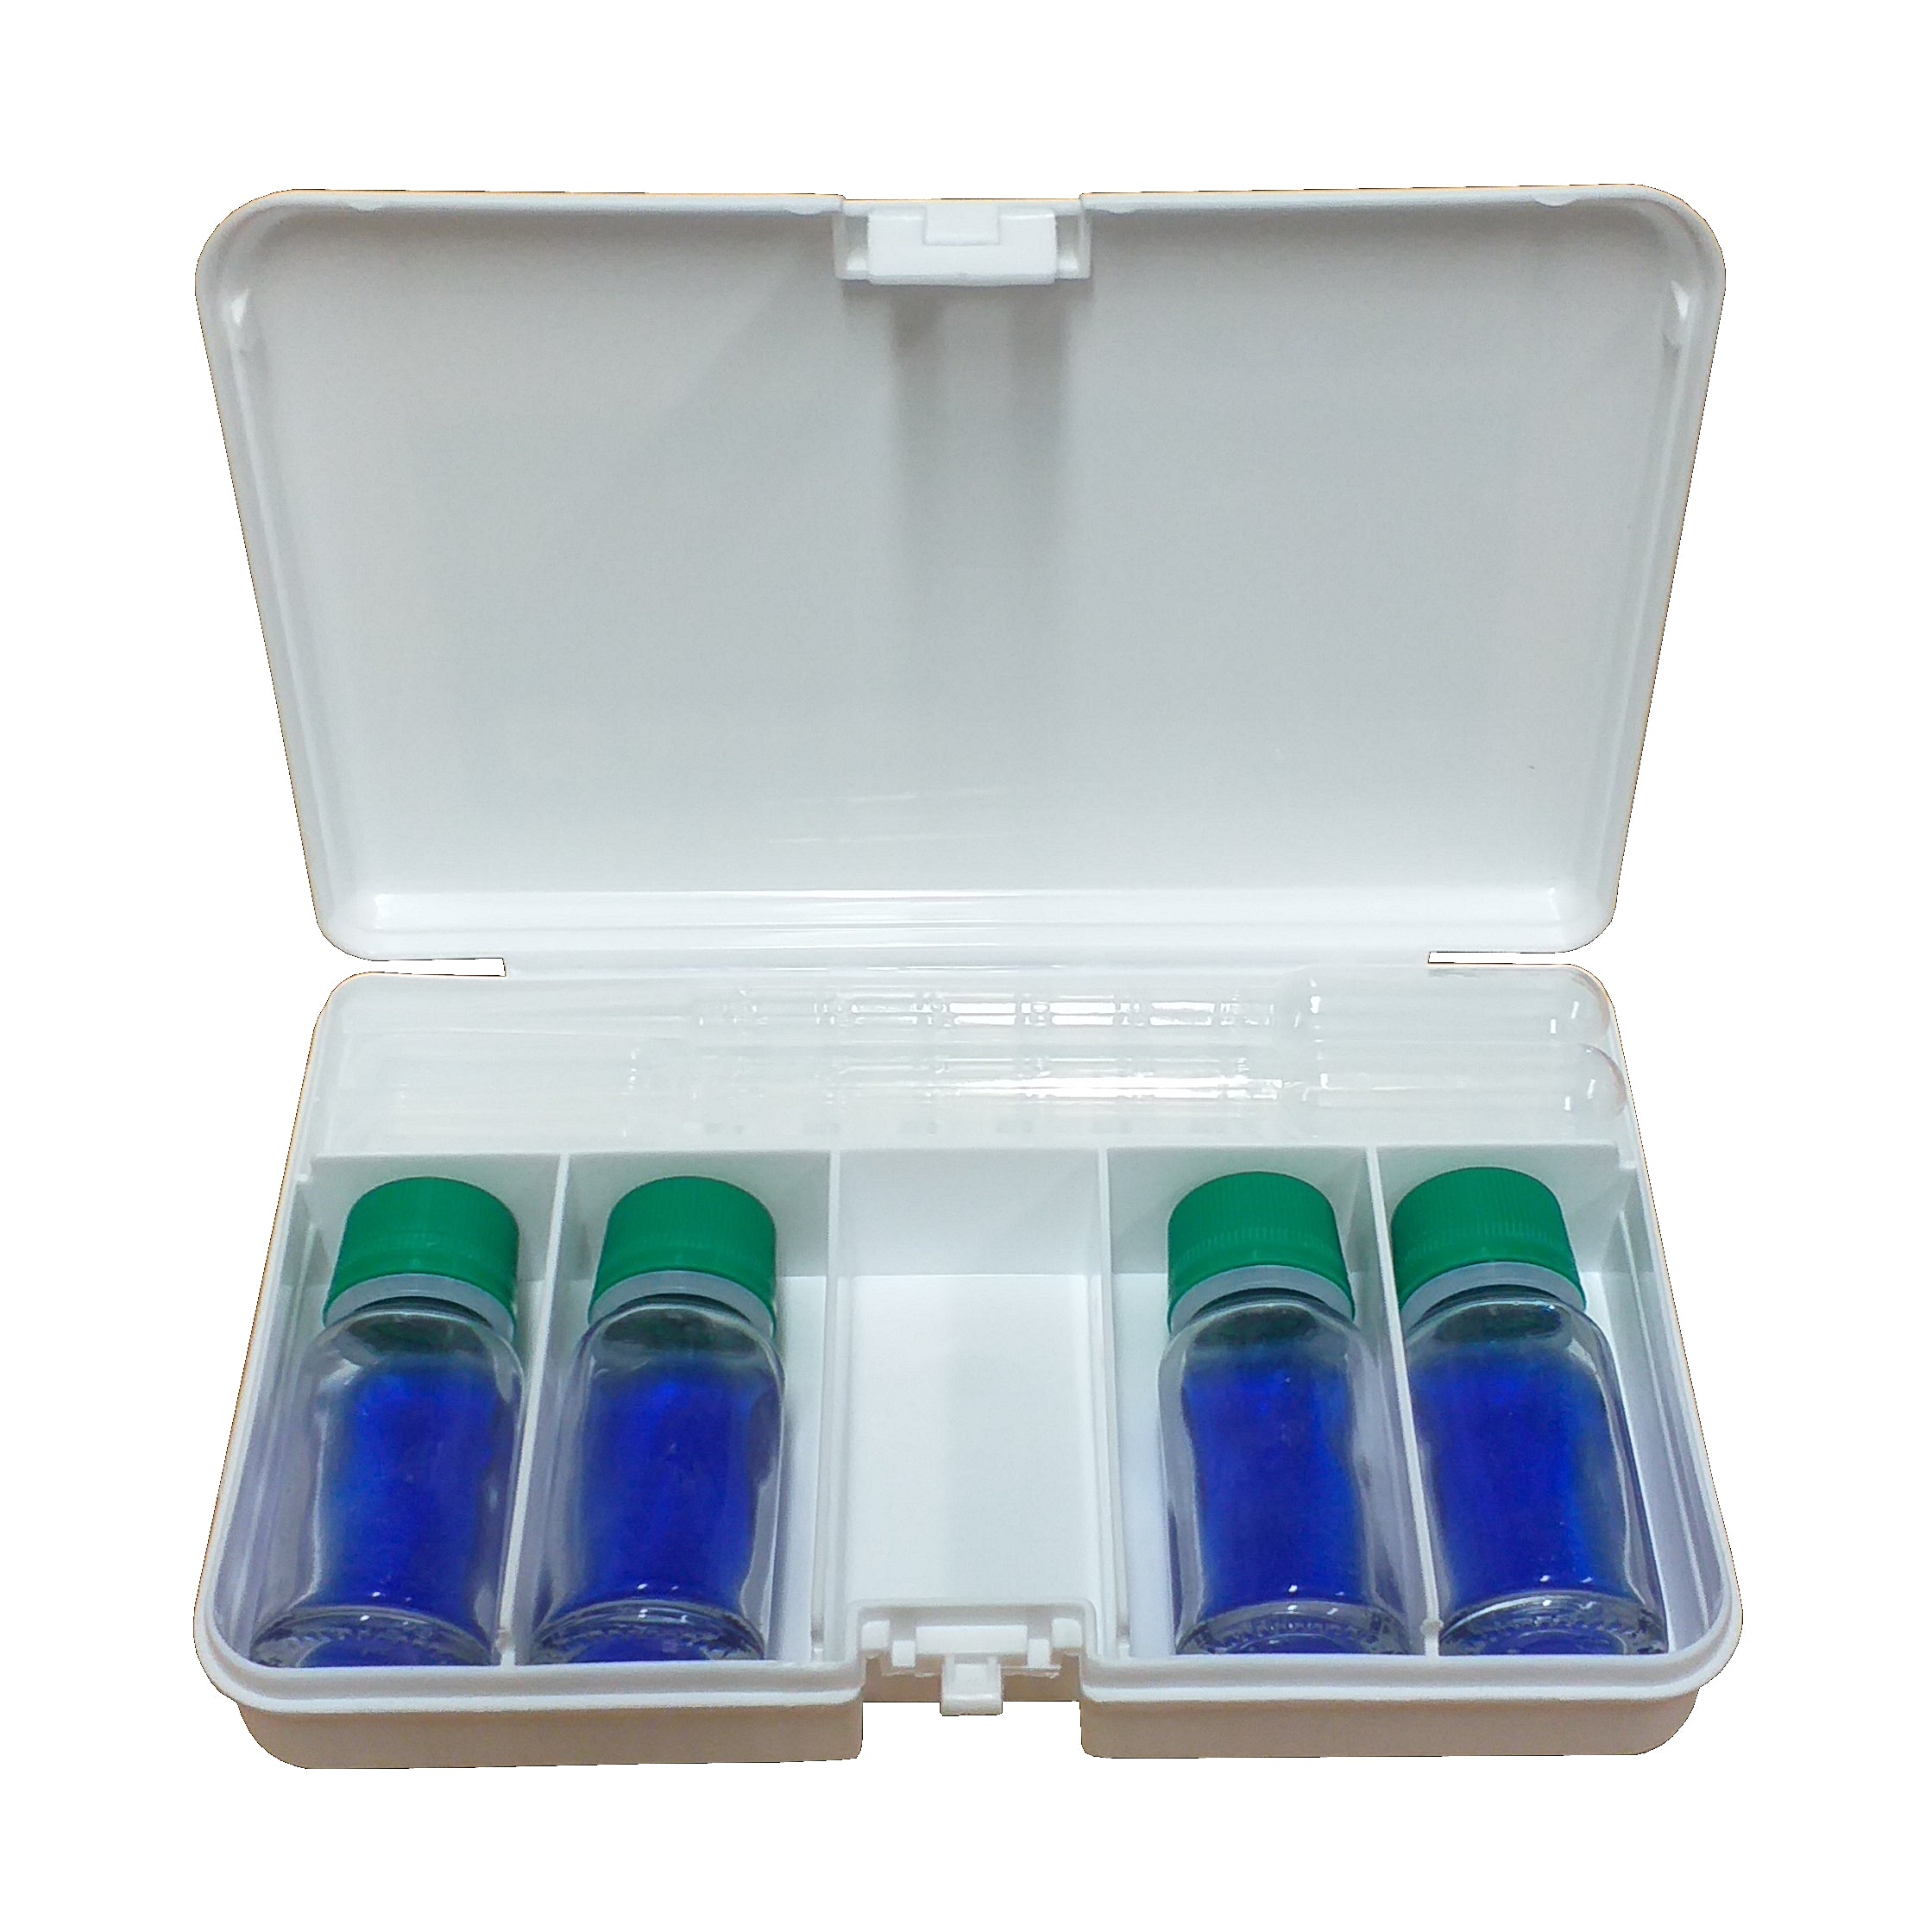 Acid test kit for all AC/R gas